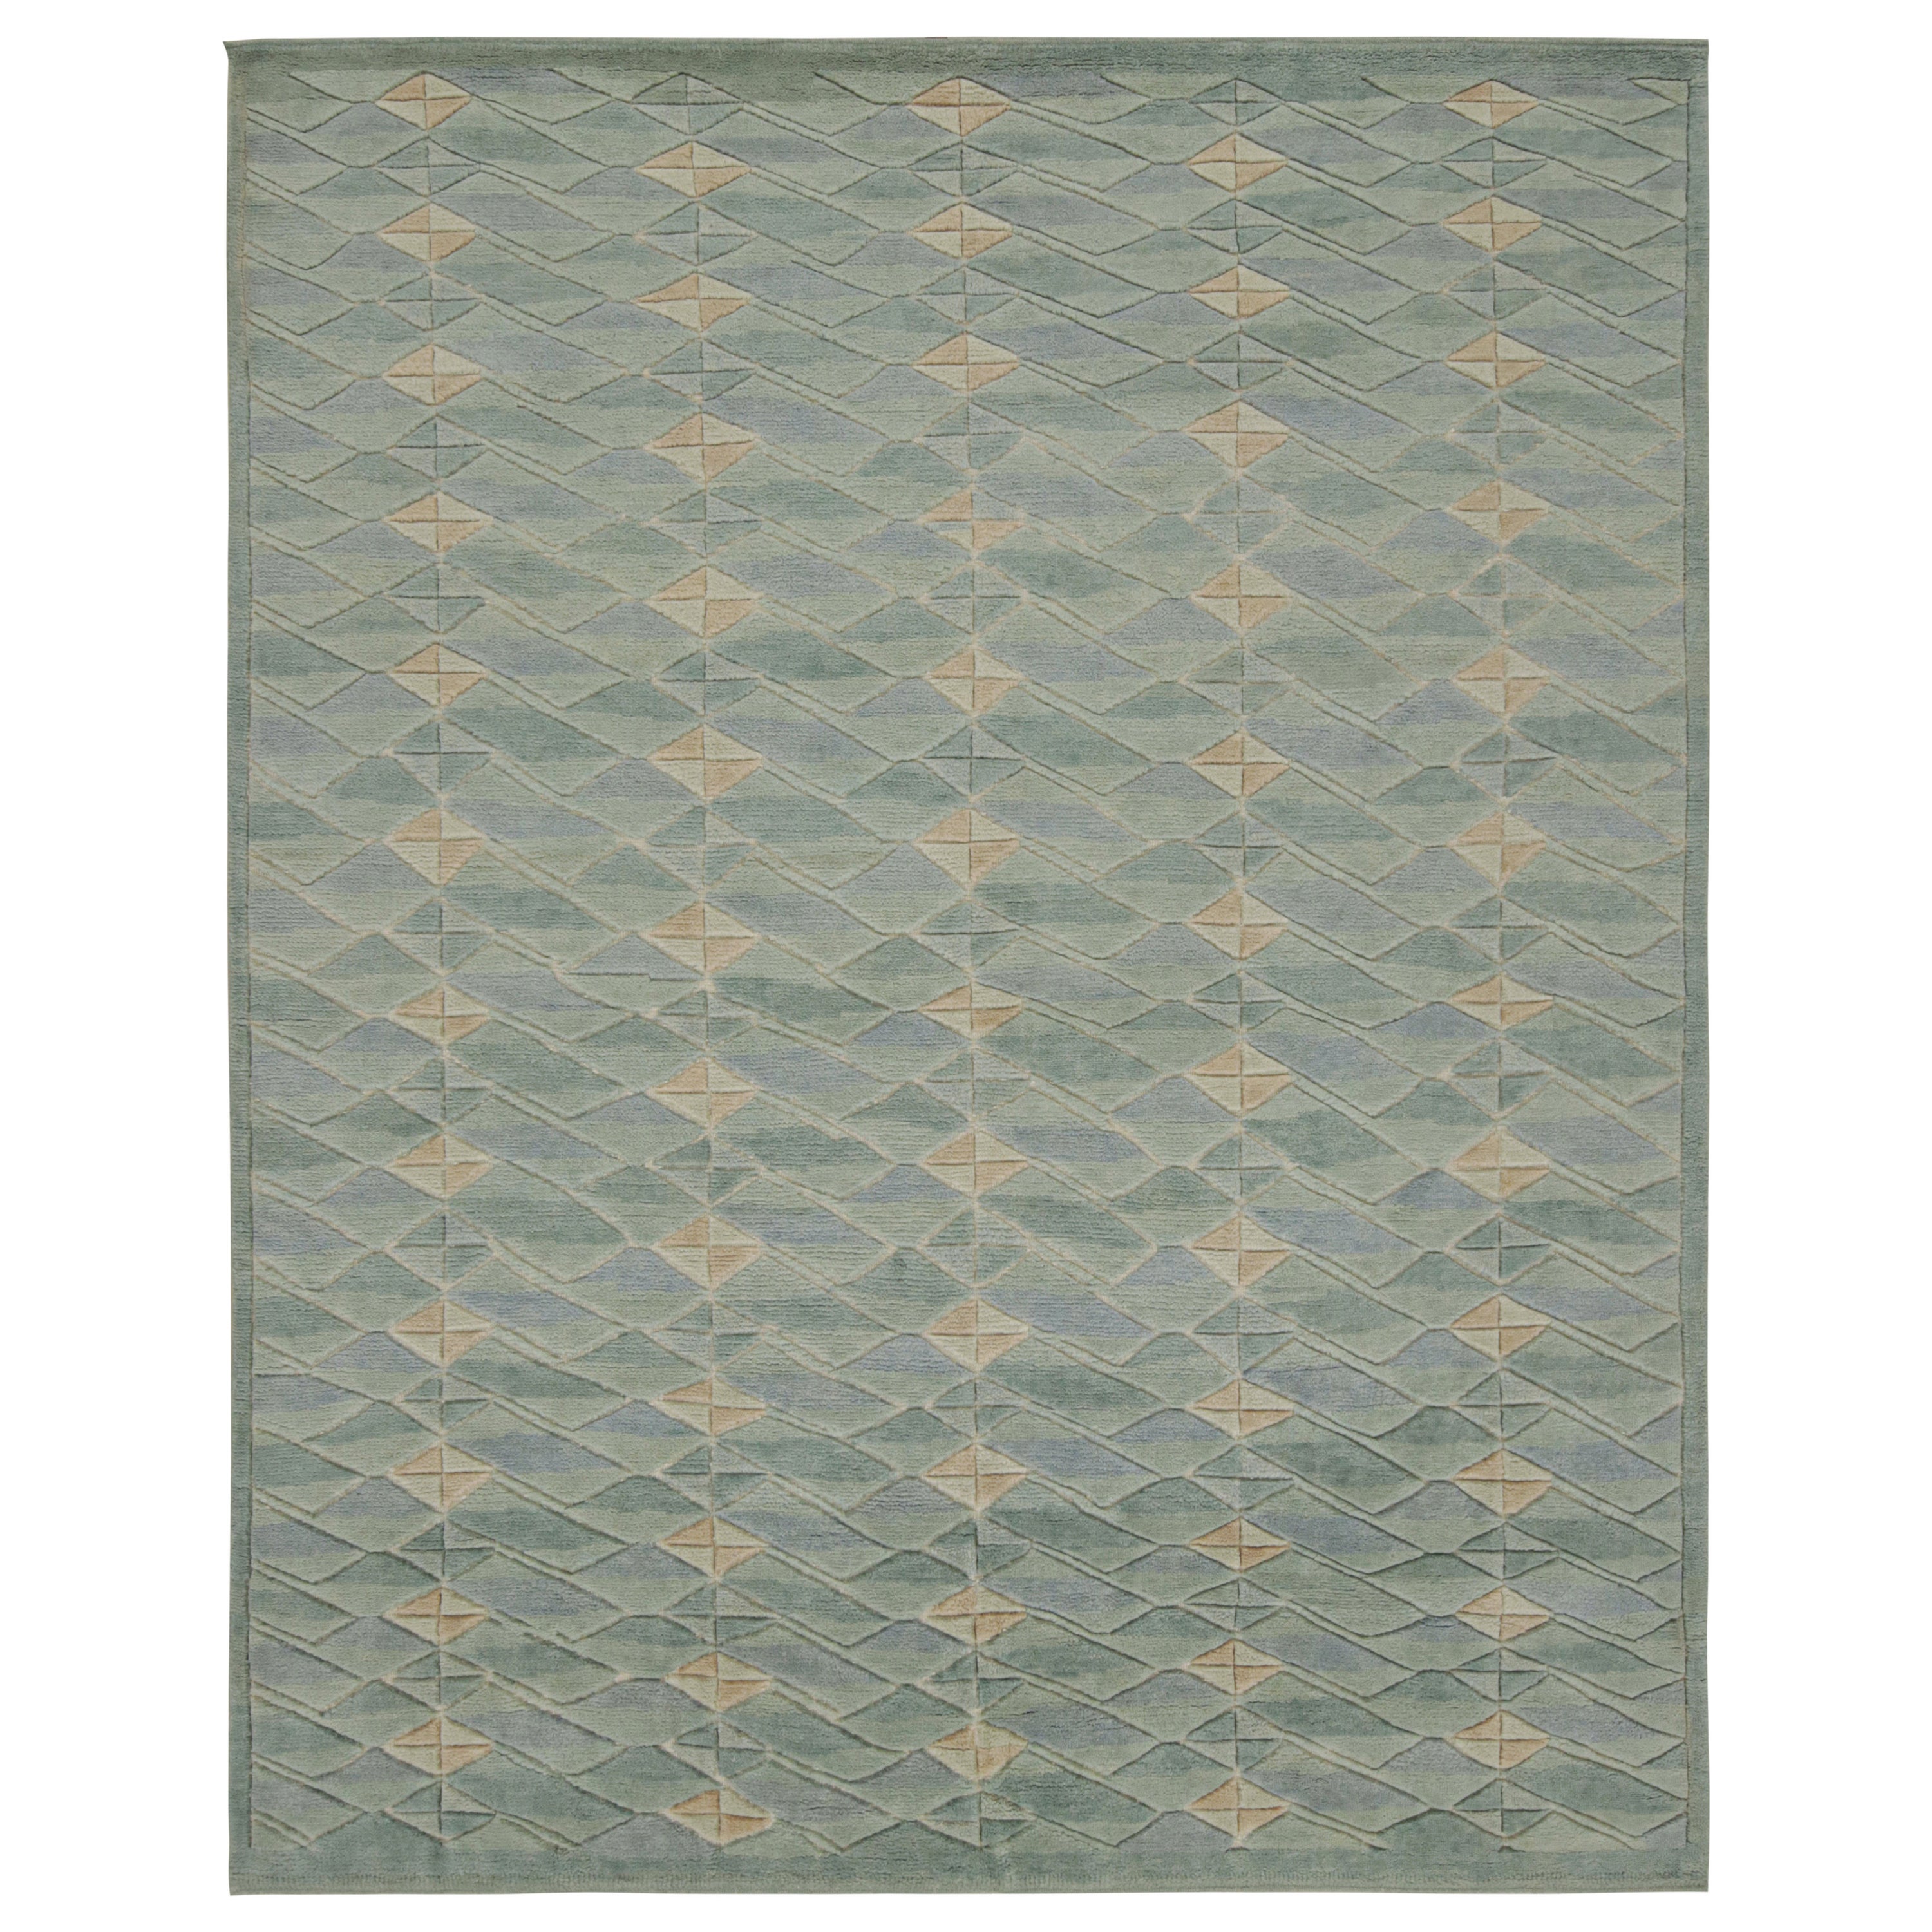 Rug & Kilim’s Scandinavian Style Rug in Teal Blue and Green Geometric Patterns